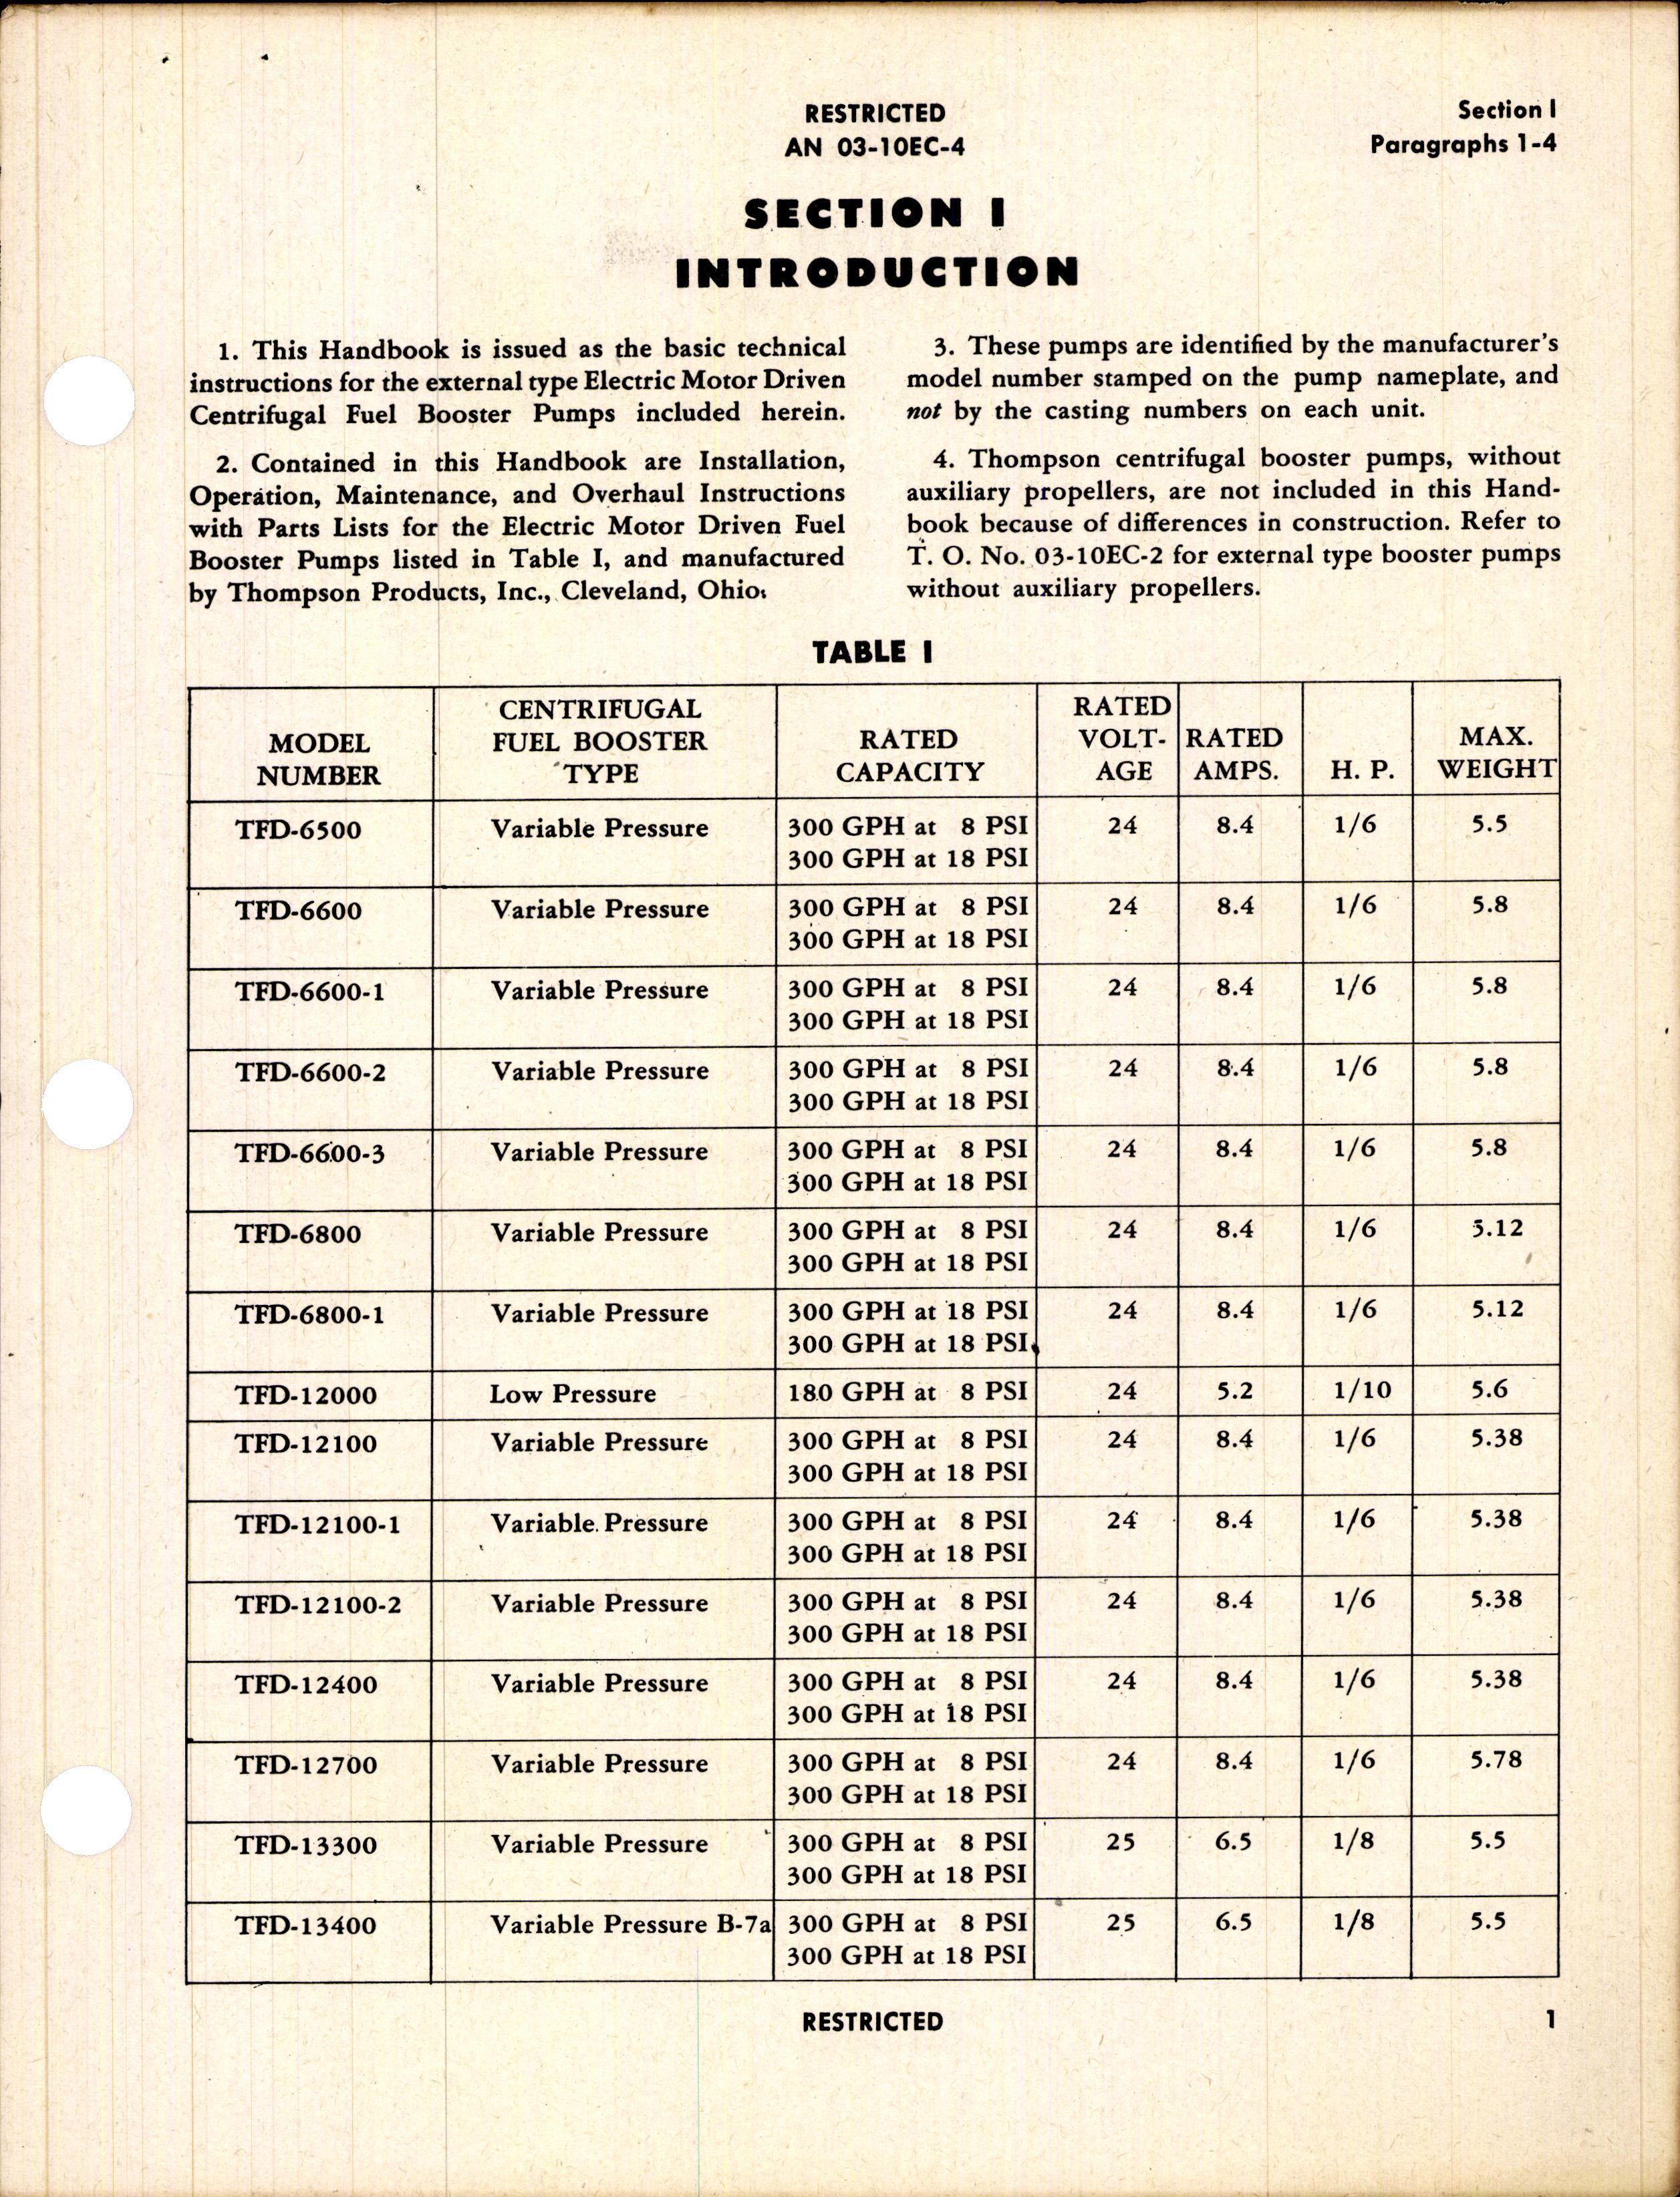 Sample page 5 from AirCorps Library document: Operation, Service, & Overhaul Instructions with Parts Catalog for Thompson Fuel Booster Pumps